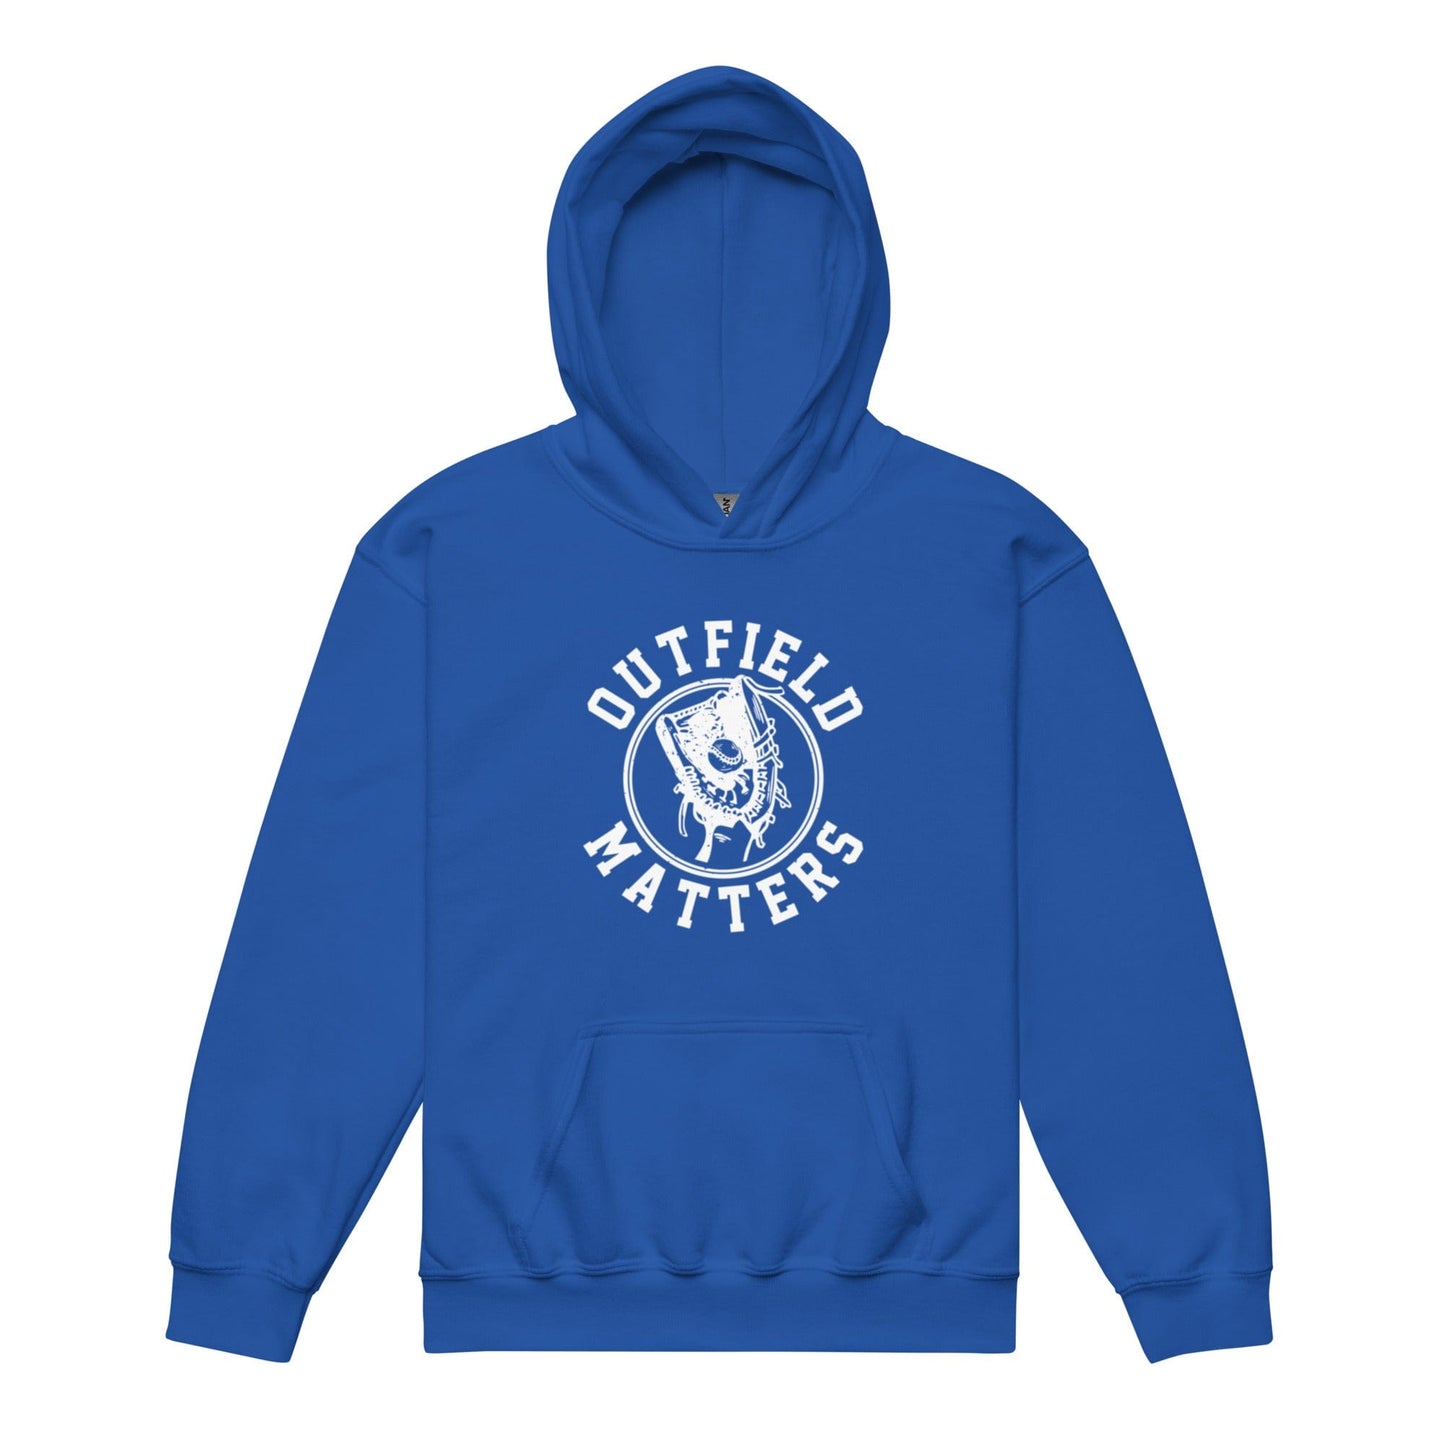 Outfield Matters - Youth Hoodie